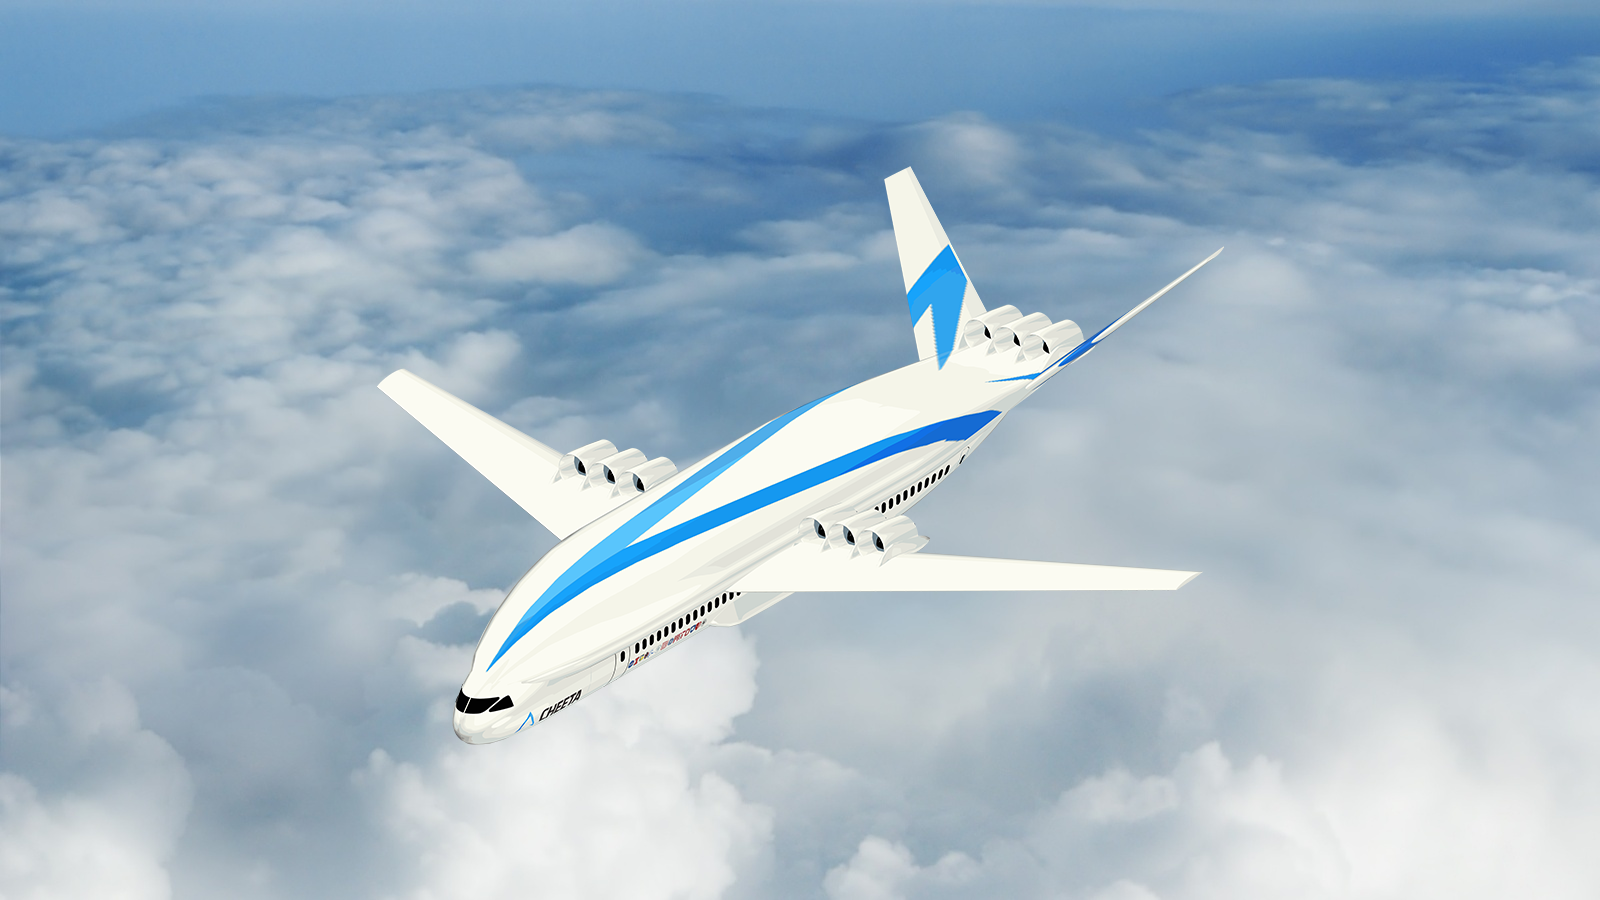 Artist illustration of the CHEETA's unique aircraft design protoype, a blue and white aircraft, in flight above the clouds.